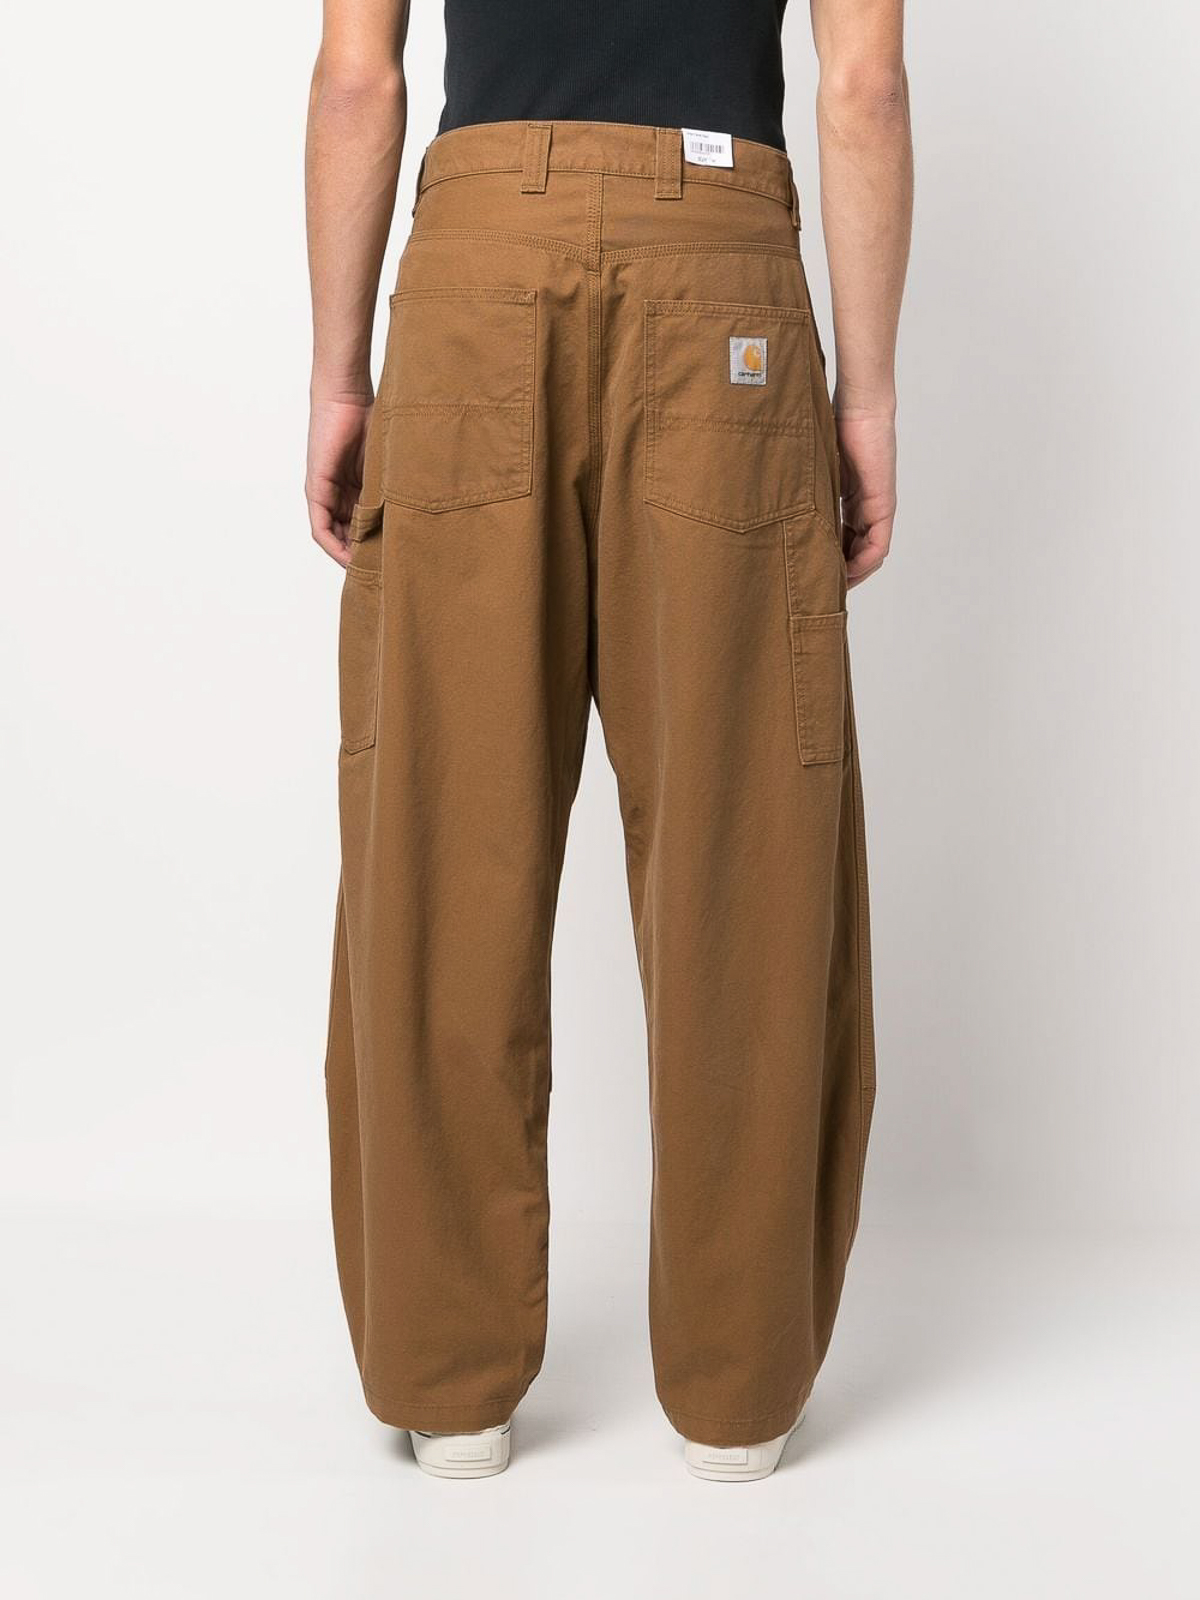 Men Casual Trousers  Buy Trousers For Men Online at the best prices in  India  CANOE TRENDS